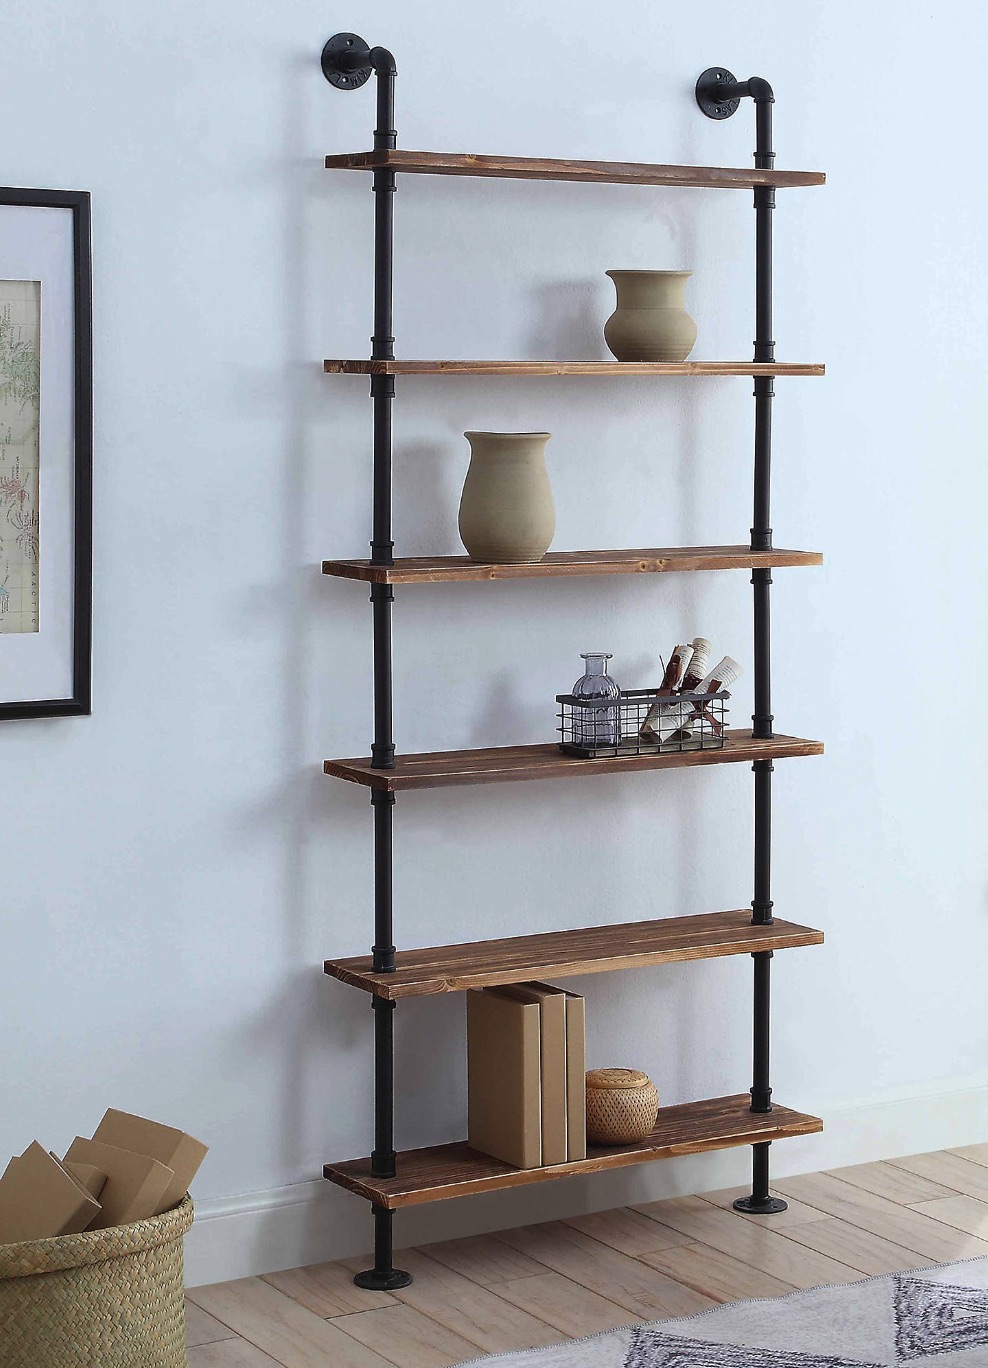 Home Office Storage Annalee Industrial Piping Shelf #Decor #IndustrialDecor #Bookcases #IndustrialBookcases #HomeOffice #HomeStorage #Organization